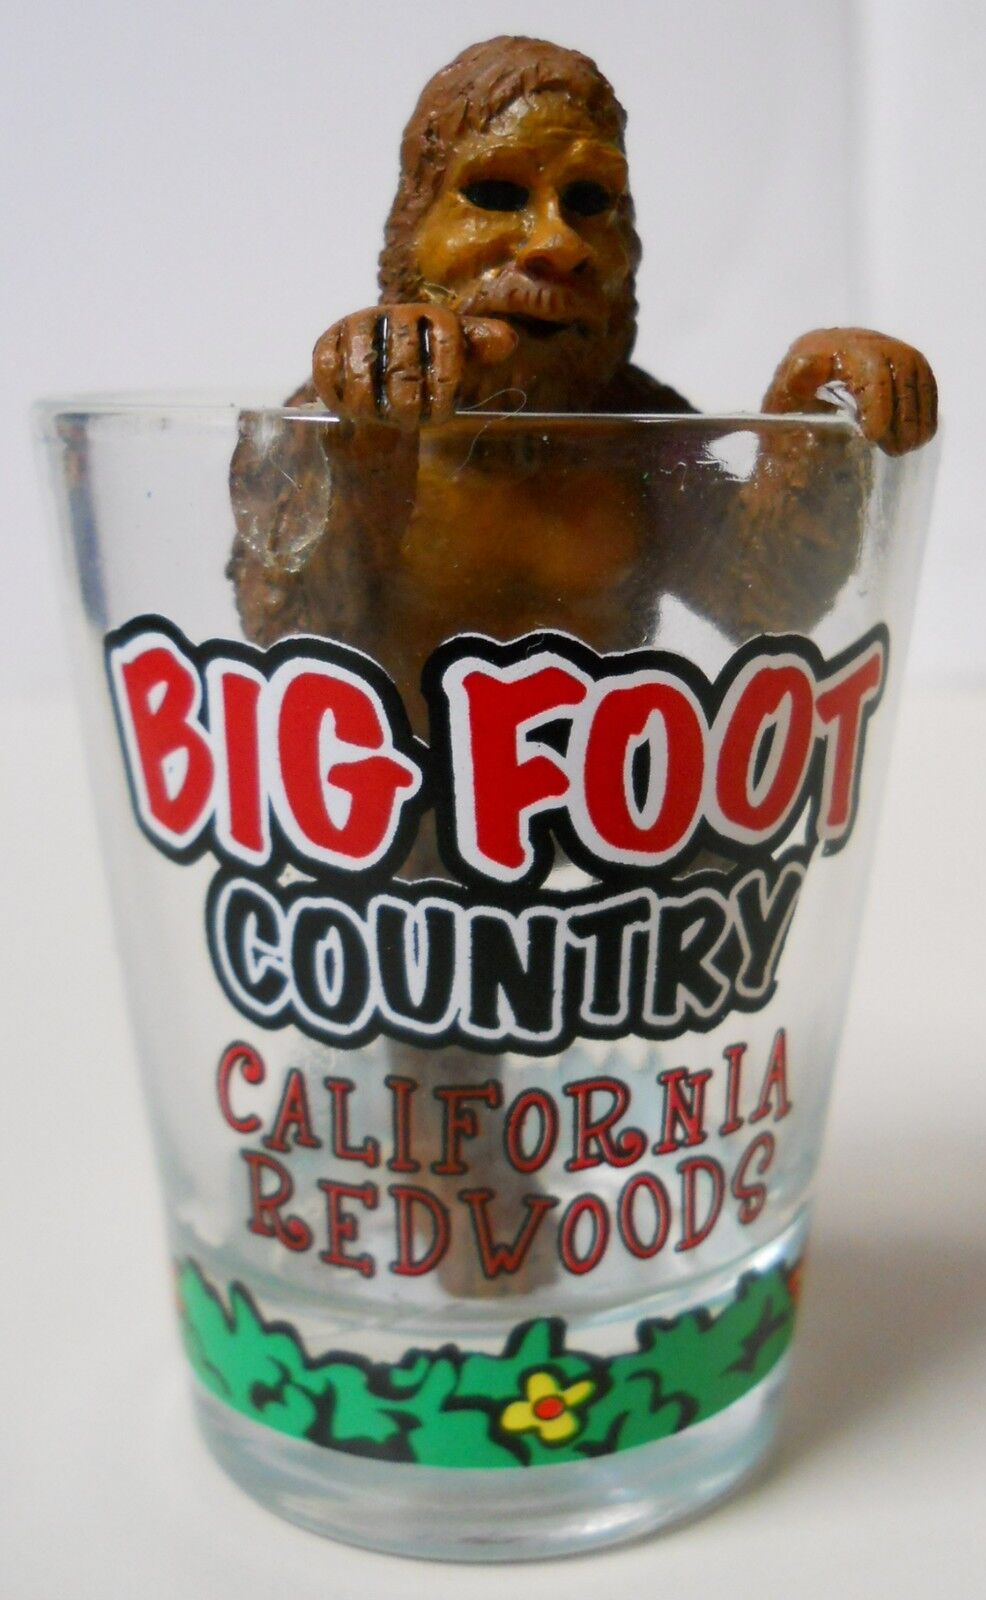 BIG FOOT SHOT GLASS, DECORATIVE COLLECTABLE, BIG FOOT FIGURE IN SHOT GLASS, NEW